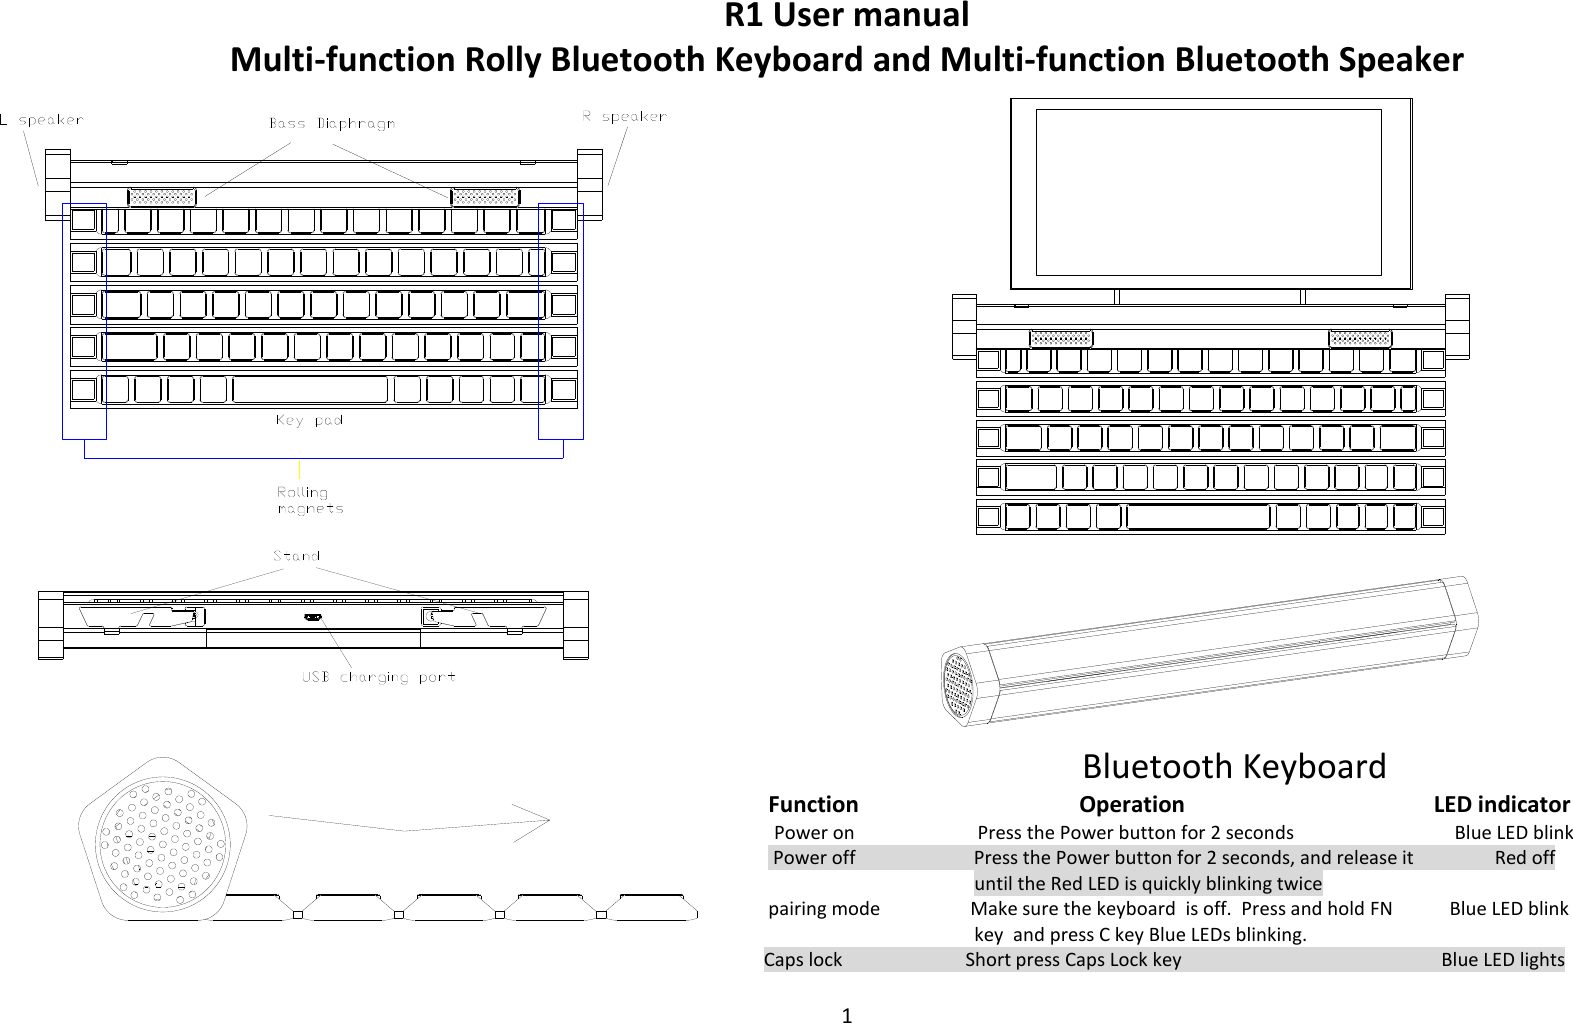   1  R1 User manual Multi-function Rolly Bluetooth Keyboard and Multi-function Bluetooth Speaker                                                                                                                                         Bluetooth Keyboard                                                                                           Function                                       Operation                                            LED indicator                                                                                                                                                       Power on                          Press the Power button for 2 seconds                                  Blue LED blink                                                                                                                                                                                    Power off                         Press the Power button for 2 seconds, and release it                 Red off                   until the Red LED is quickly blinking twice                                                                                                                                                                   pairing mode                   Make sure the keyboard  is off.  Press and hold FN            Blue LED blink            key  and press C key Blue LEDs blinking.                                                                                                                                                                  Caps lock                          Short press Caps Lock key                                                       Blue LED lights                                                                                                                        